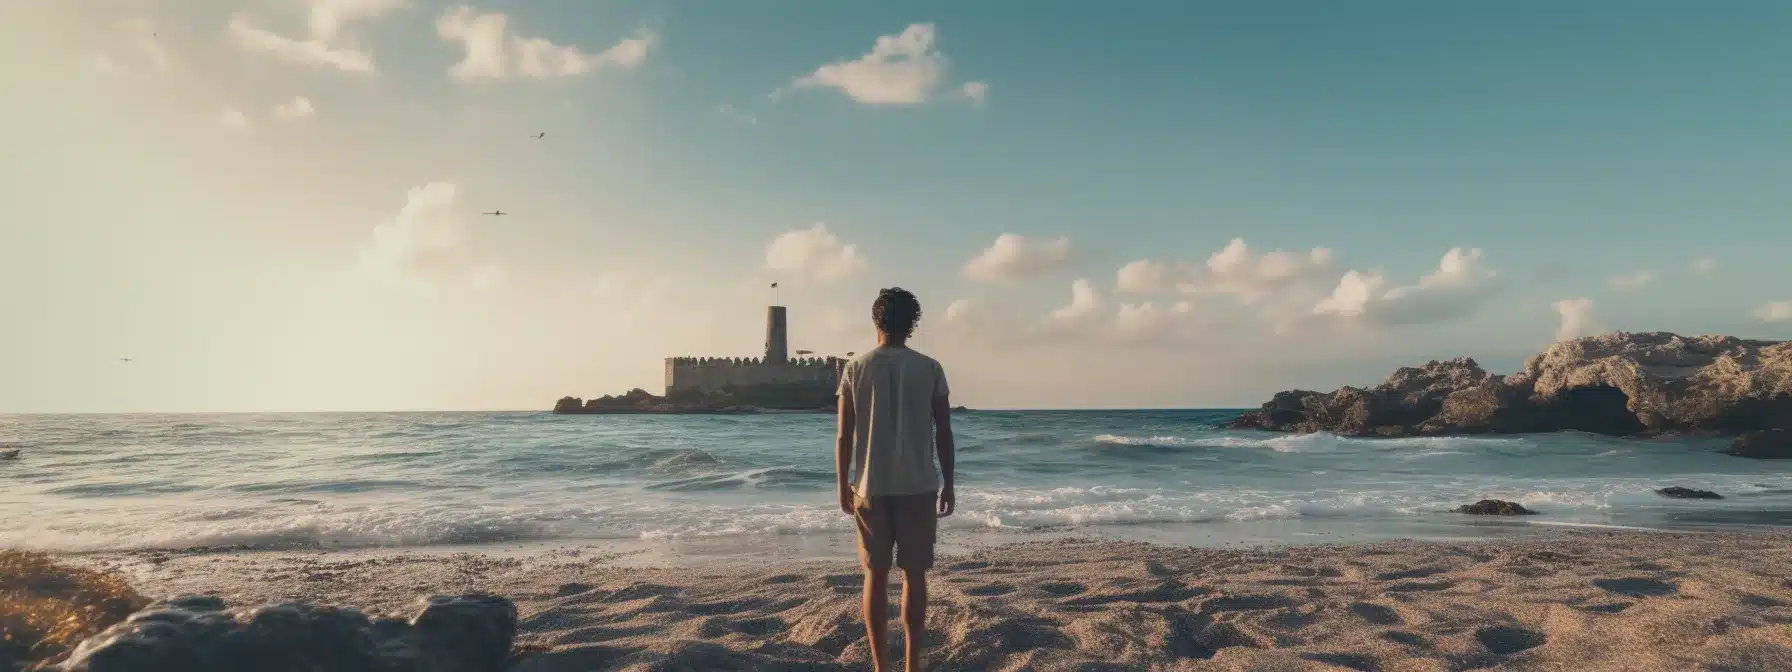 A Digital Marketer Standing On A Beach, Surrounded By A Fortress Of Secure Data Islands.